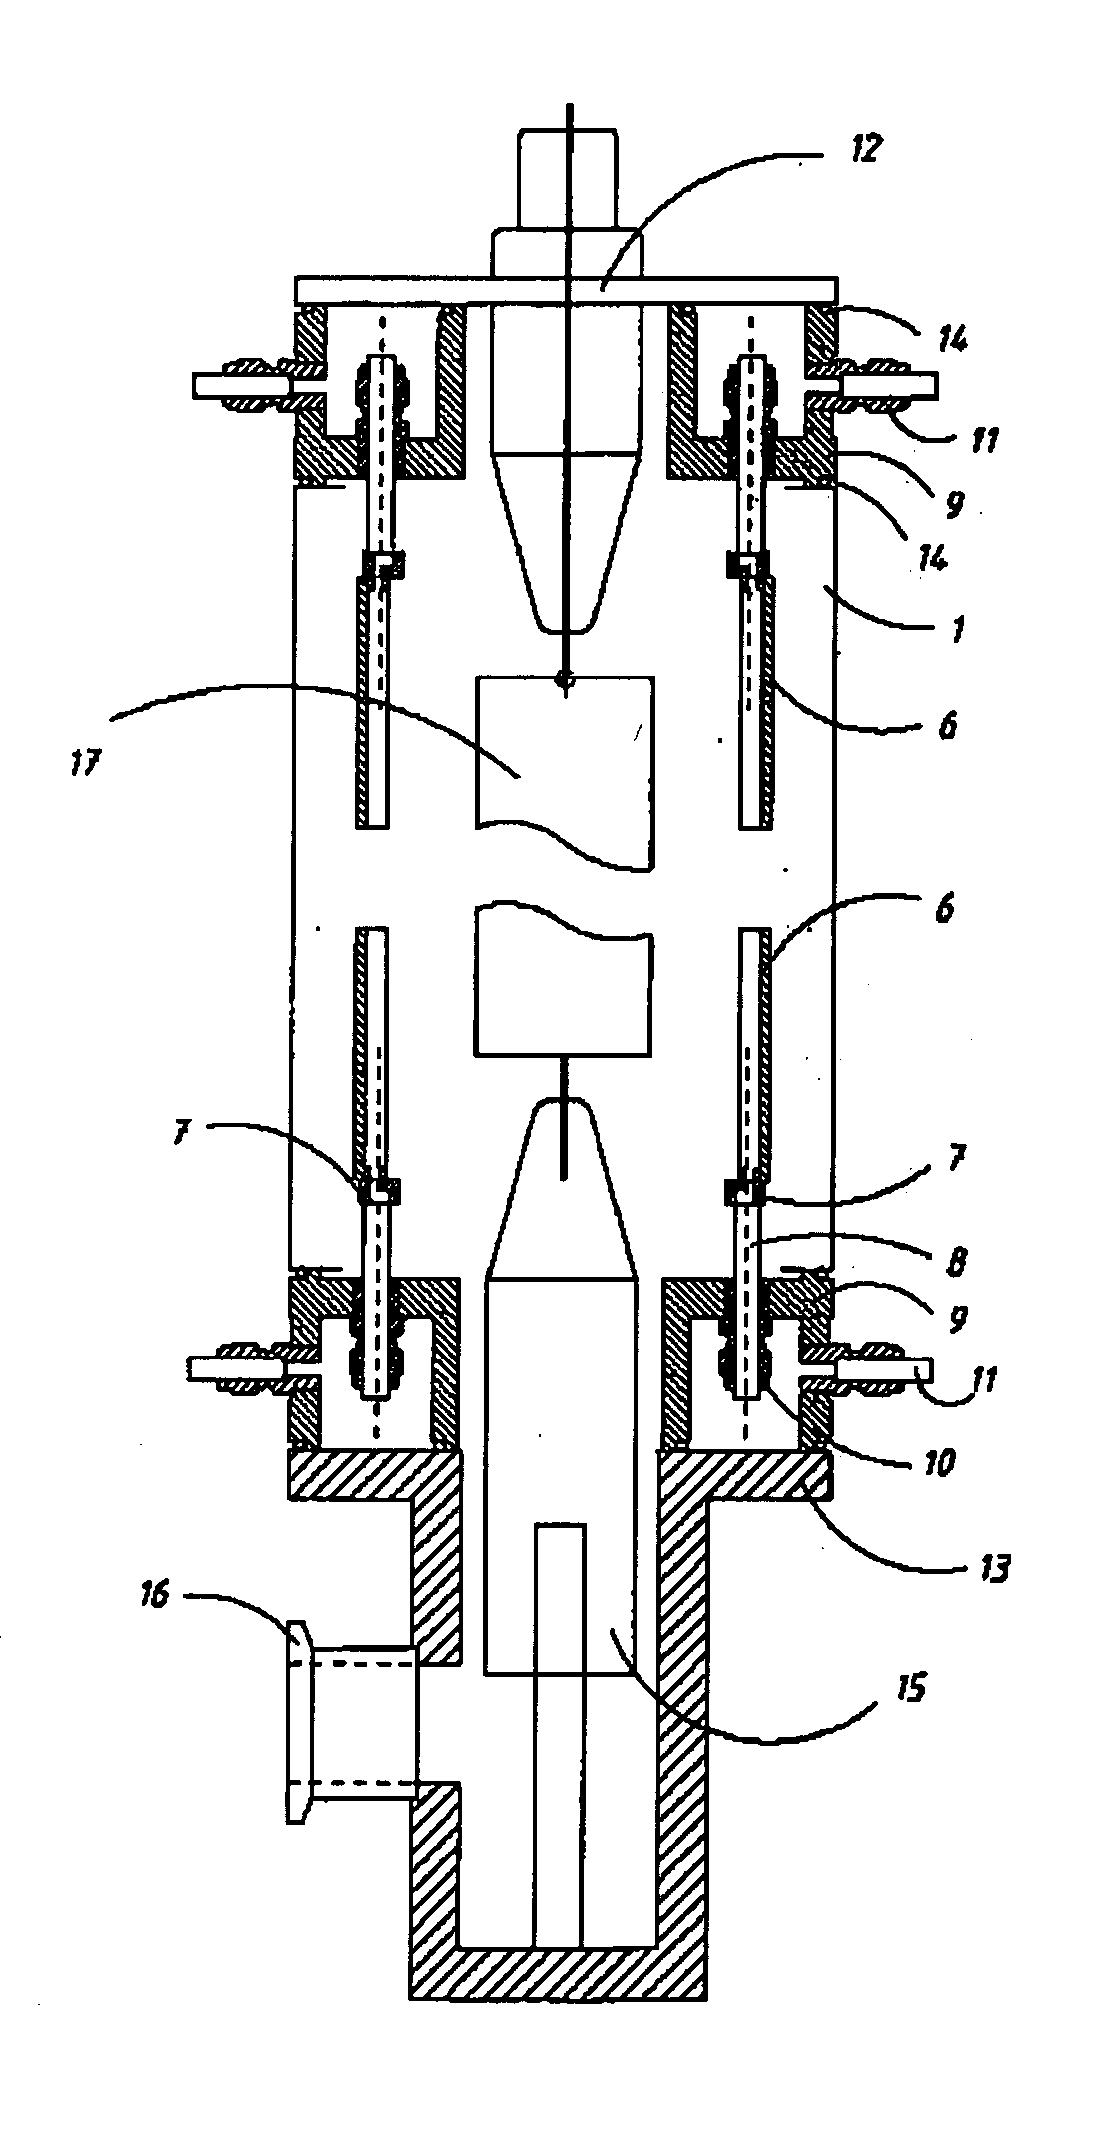 Proton Generator Apparatus for Isotope Production